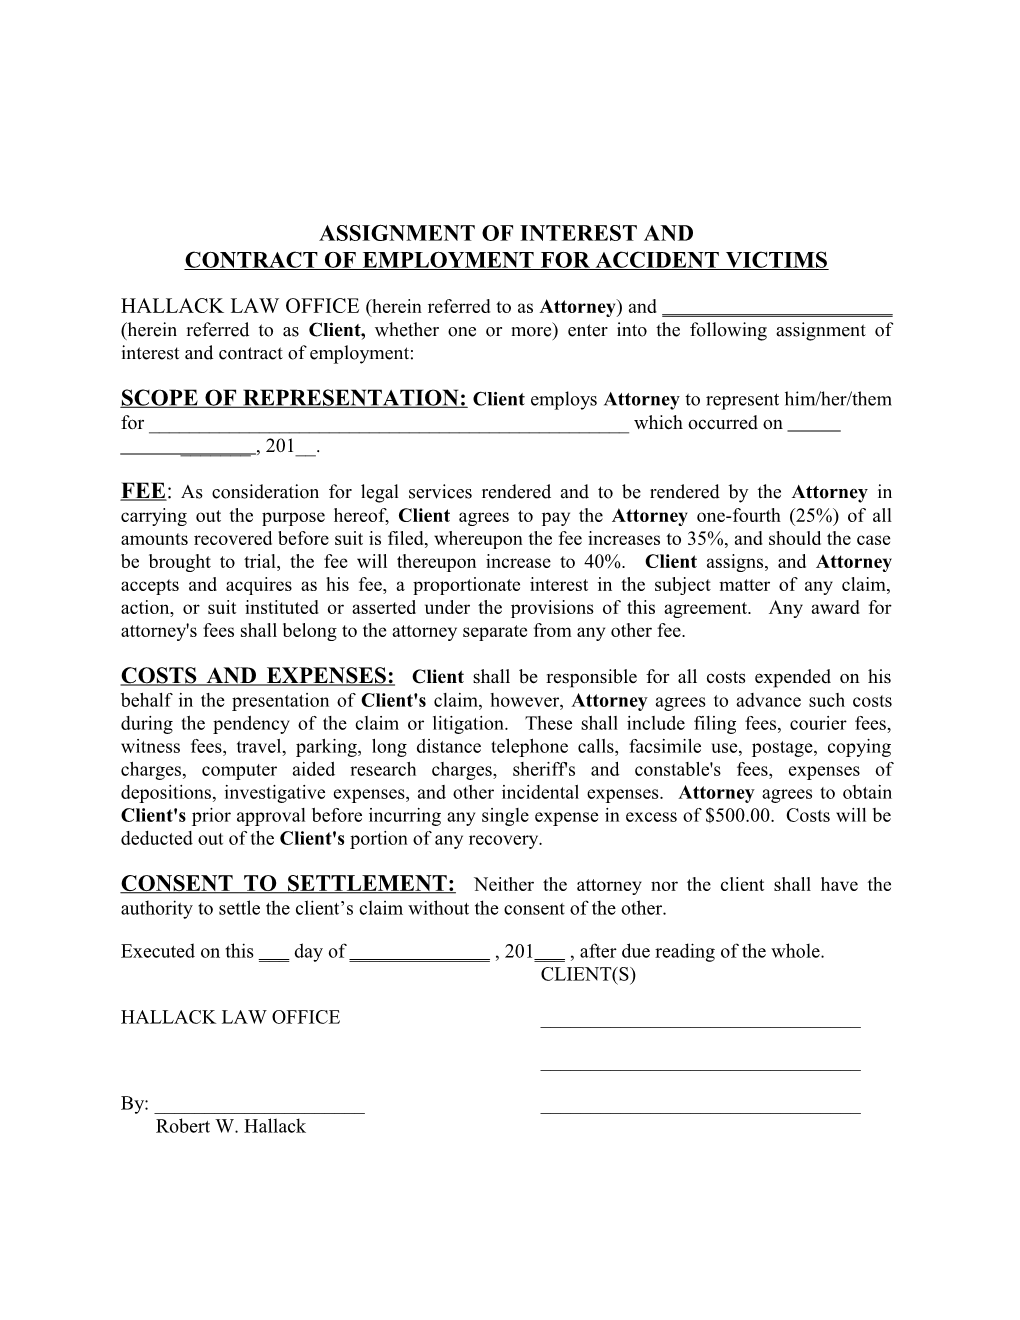 Contract of Employment for Accident Victims